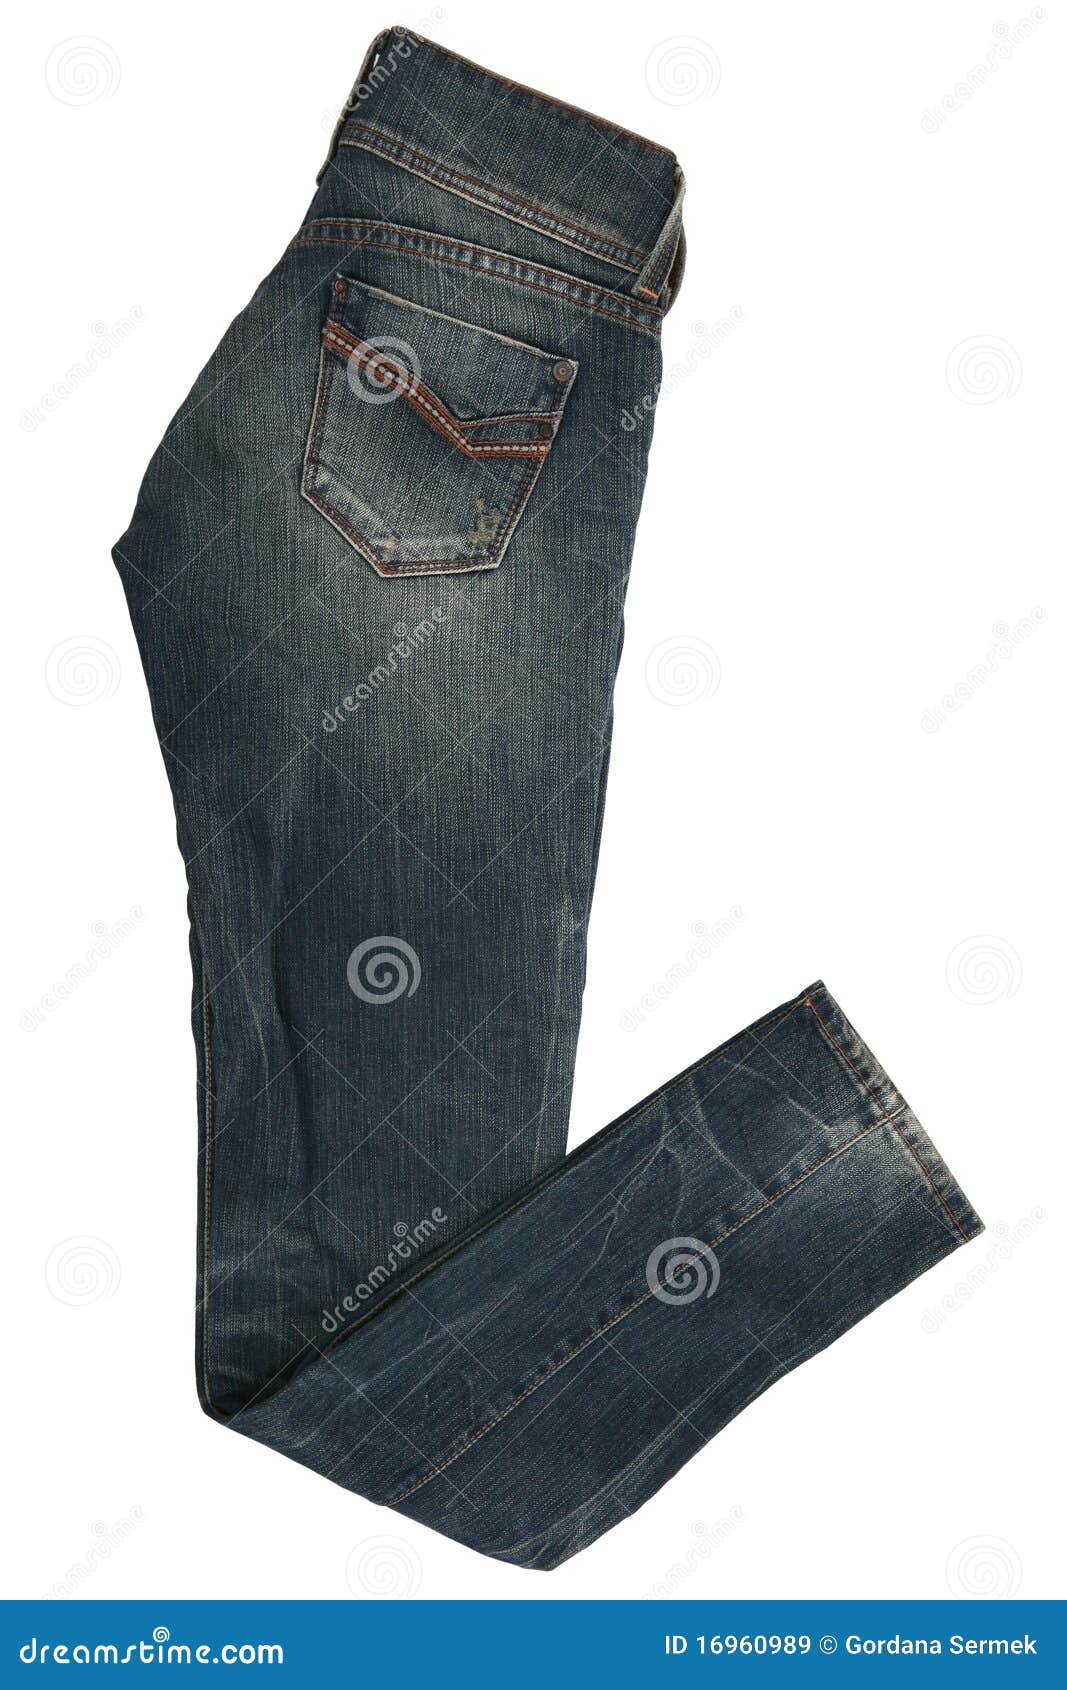 Female jeans trousers stock image. Image of detail, female - 16960989